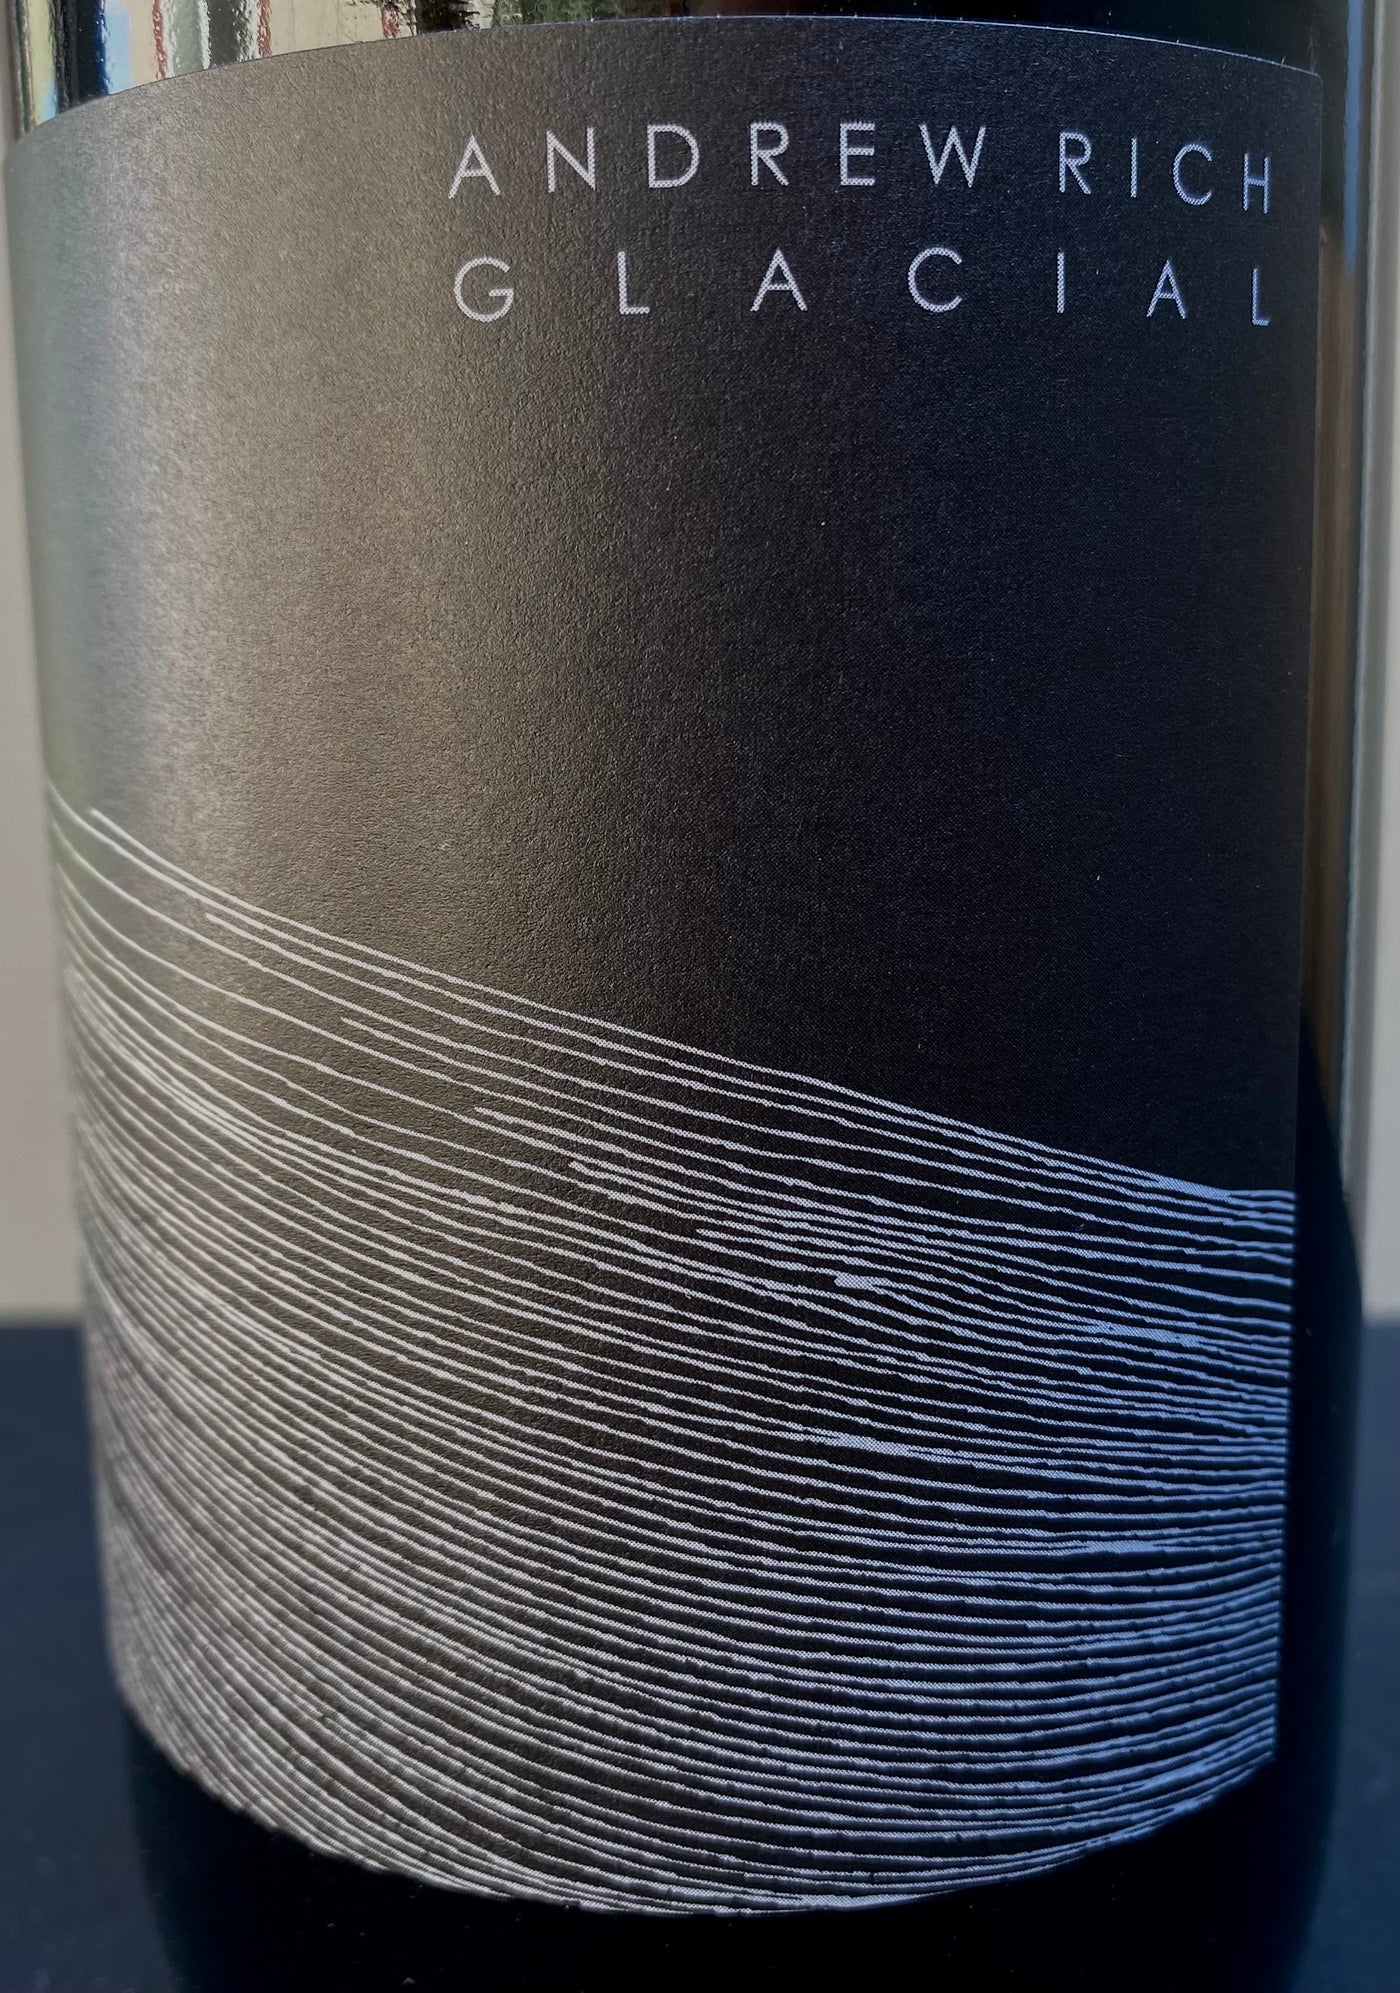 Andrew Rich Glacial Syrah-Mourvedre-Grenache 2018